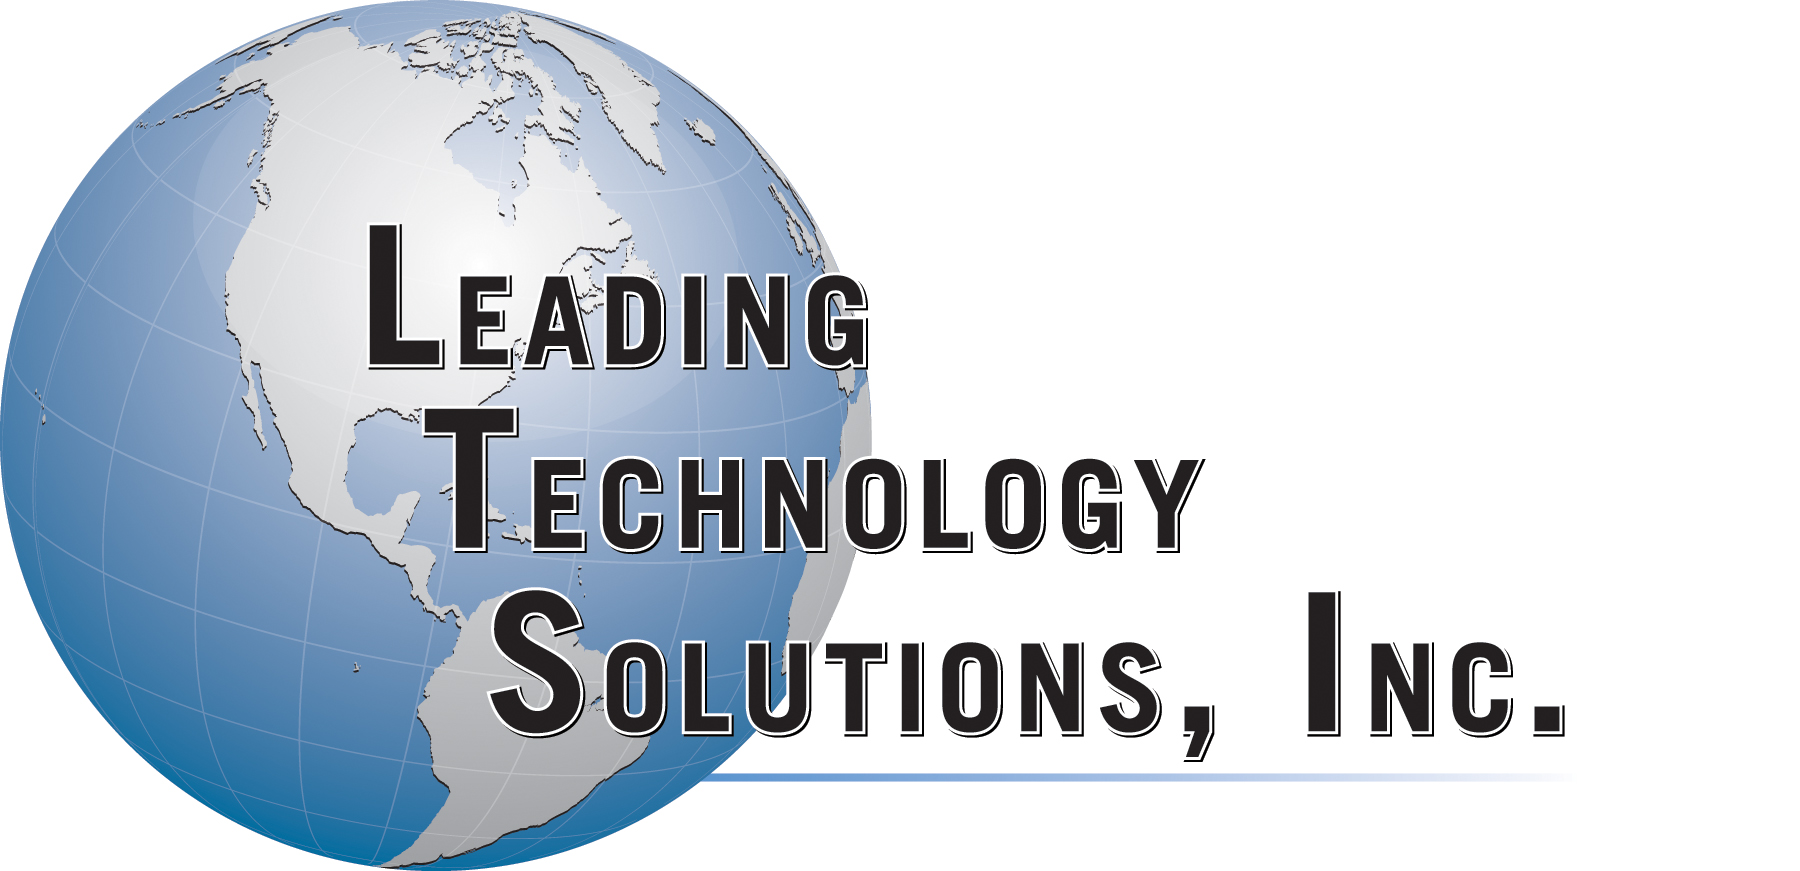 Leading Technology Solutions, Inc.